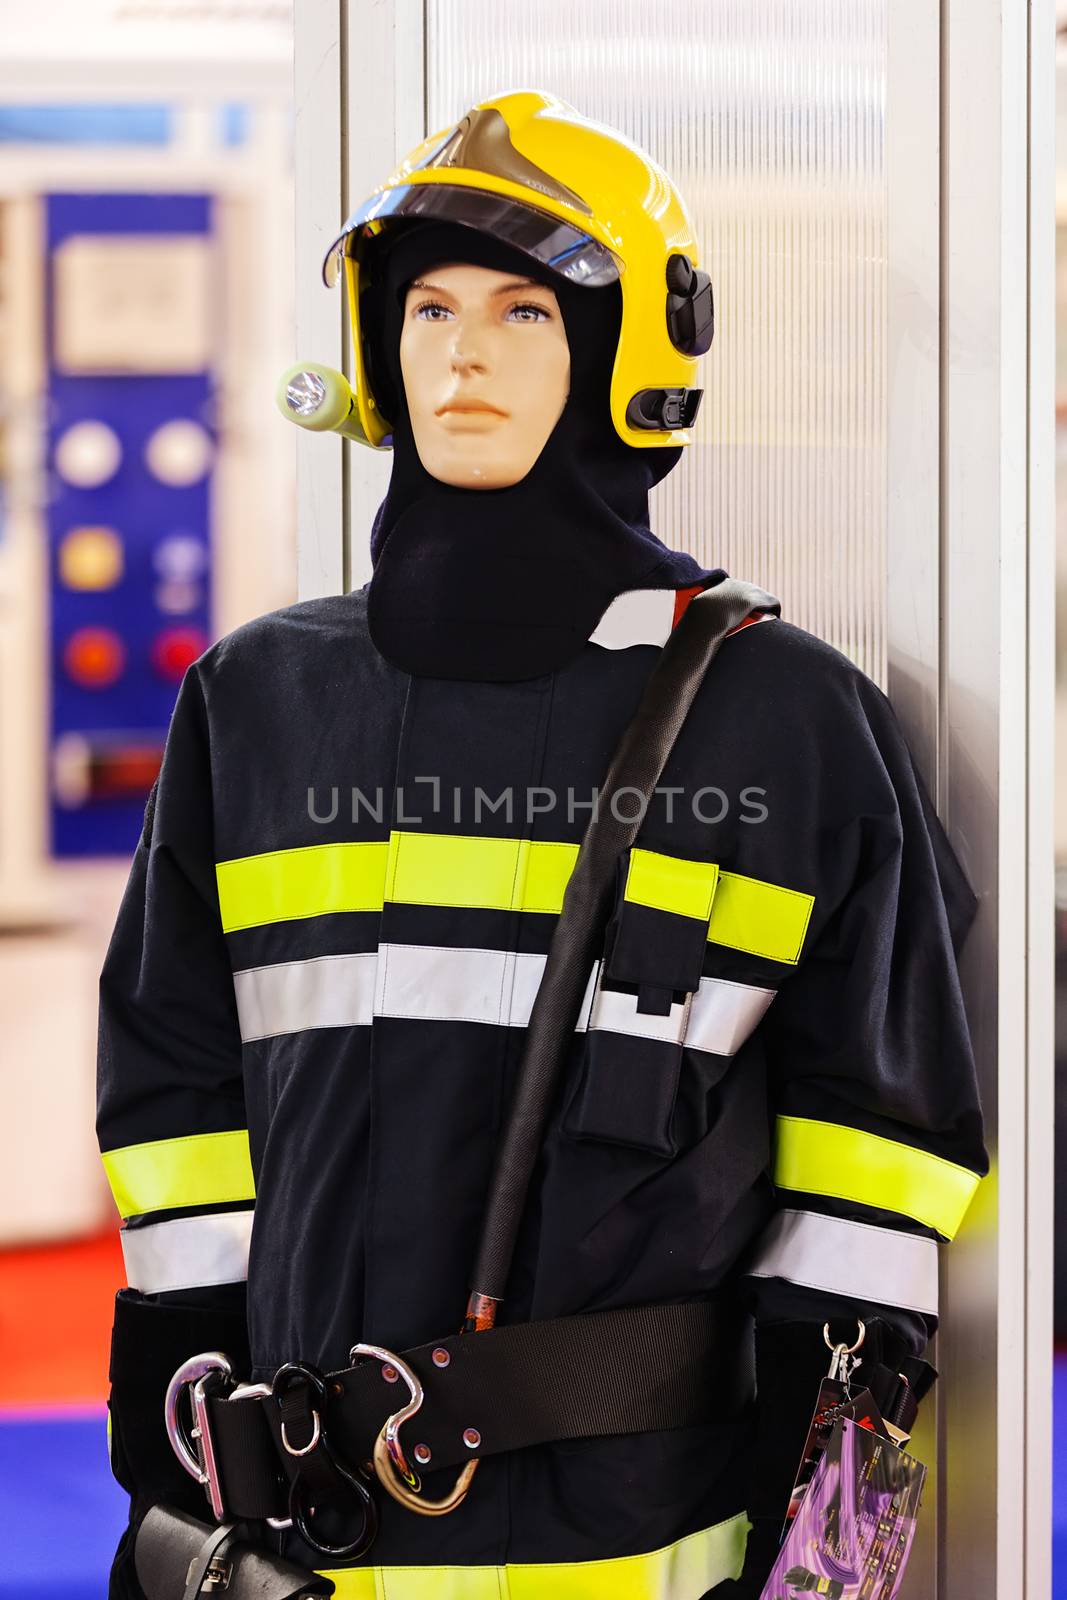 close up of new  fire fighting equipment on a doll